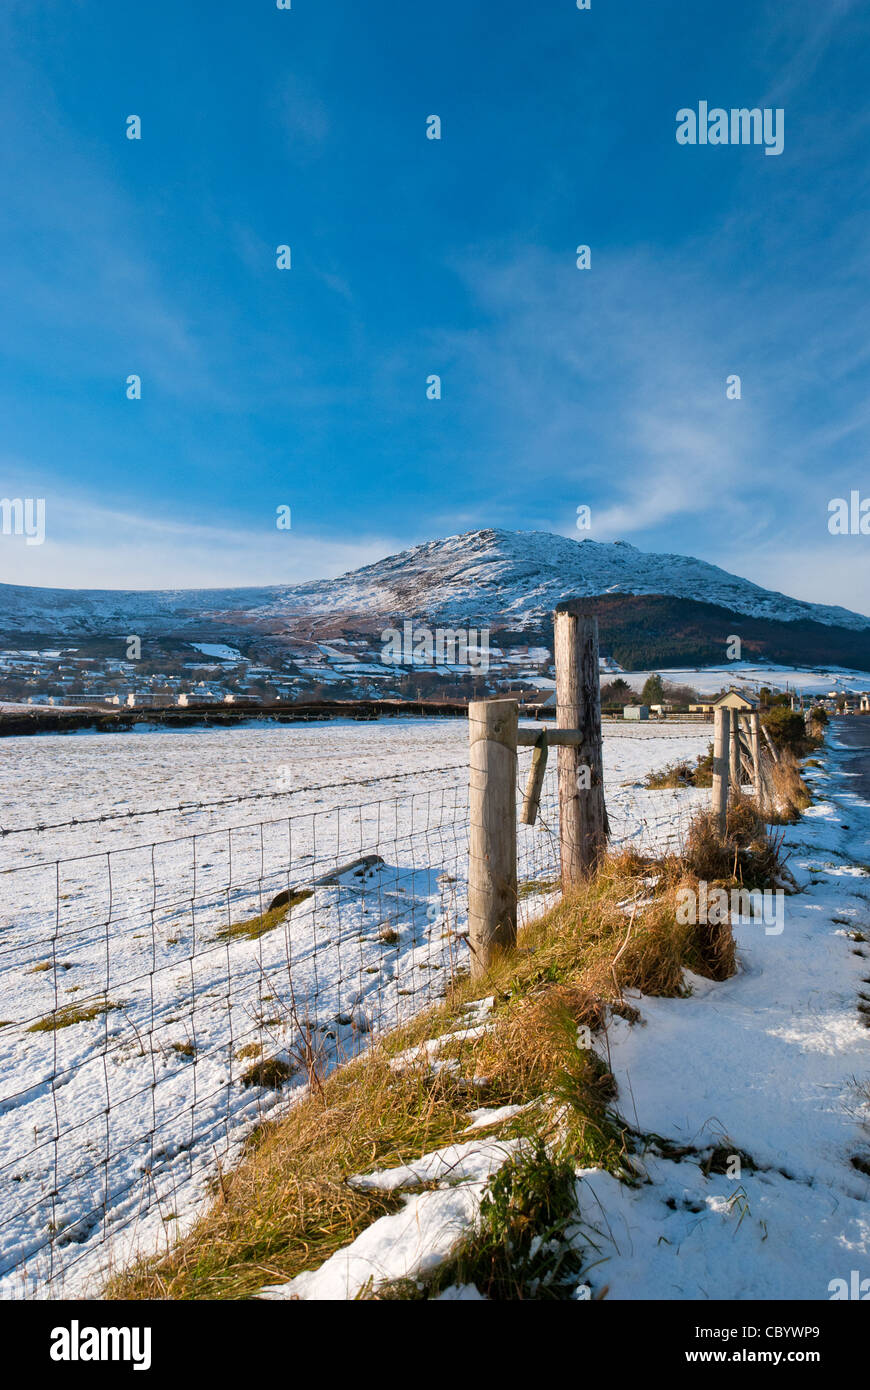 Winter time at Carlingford Stock Photo